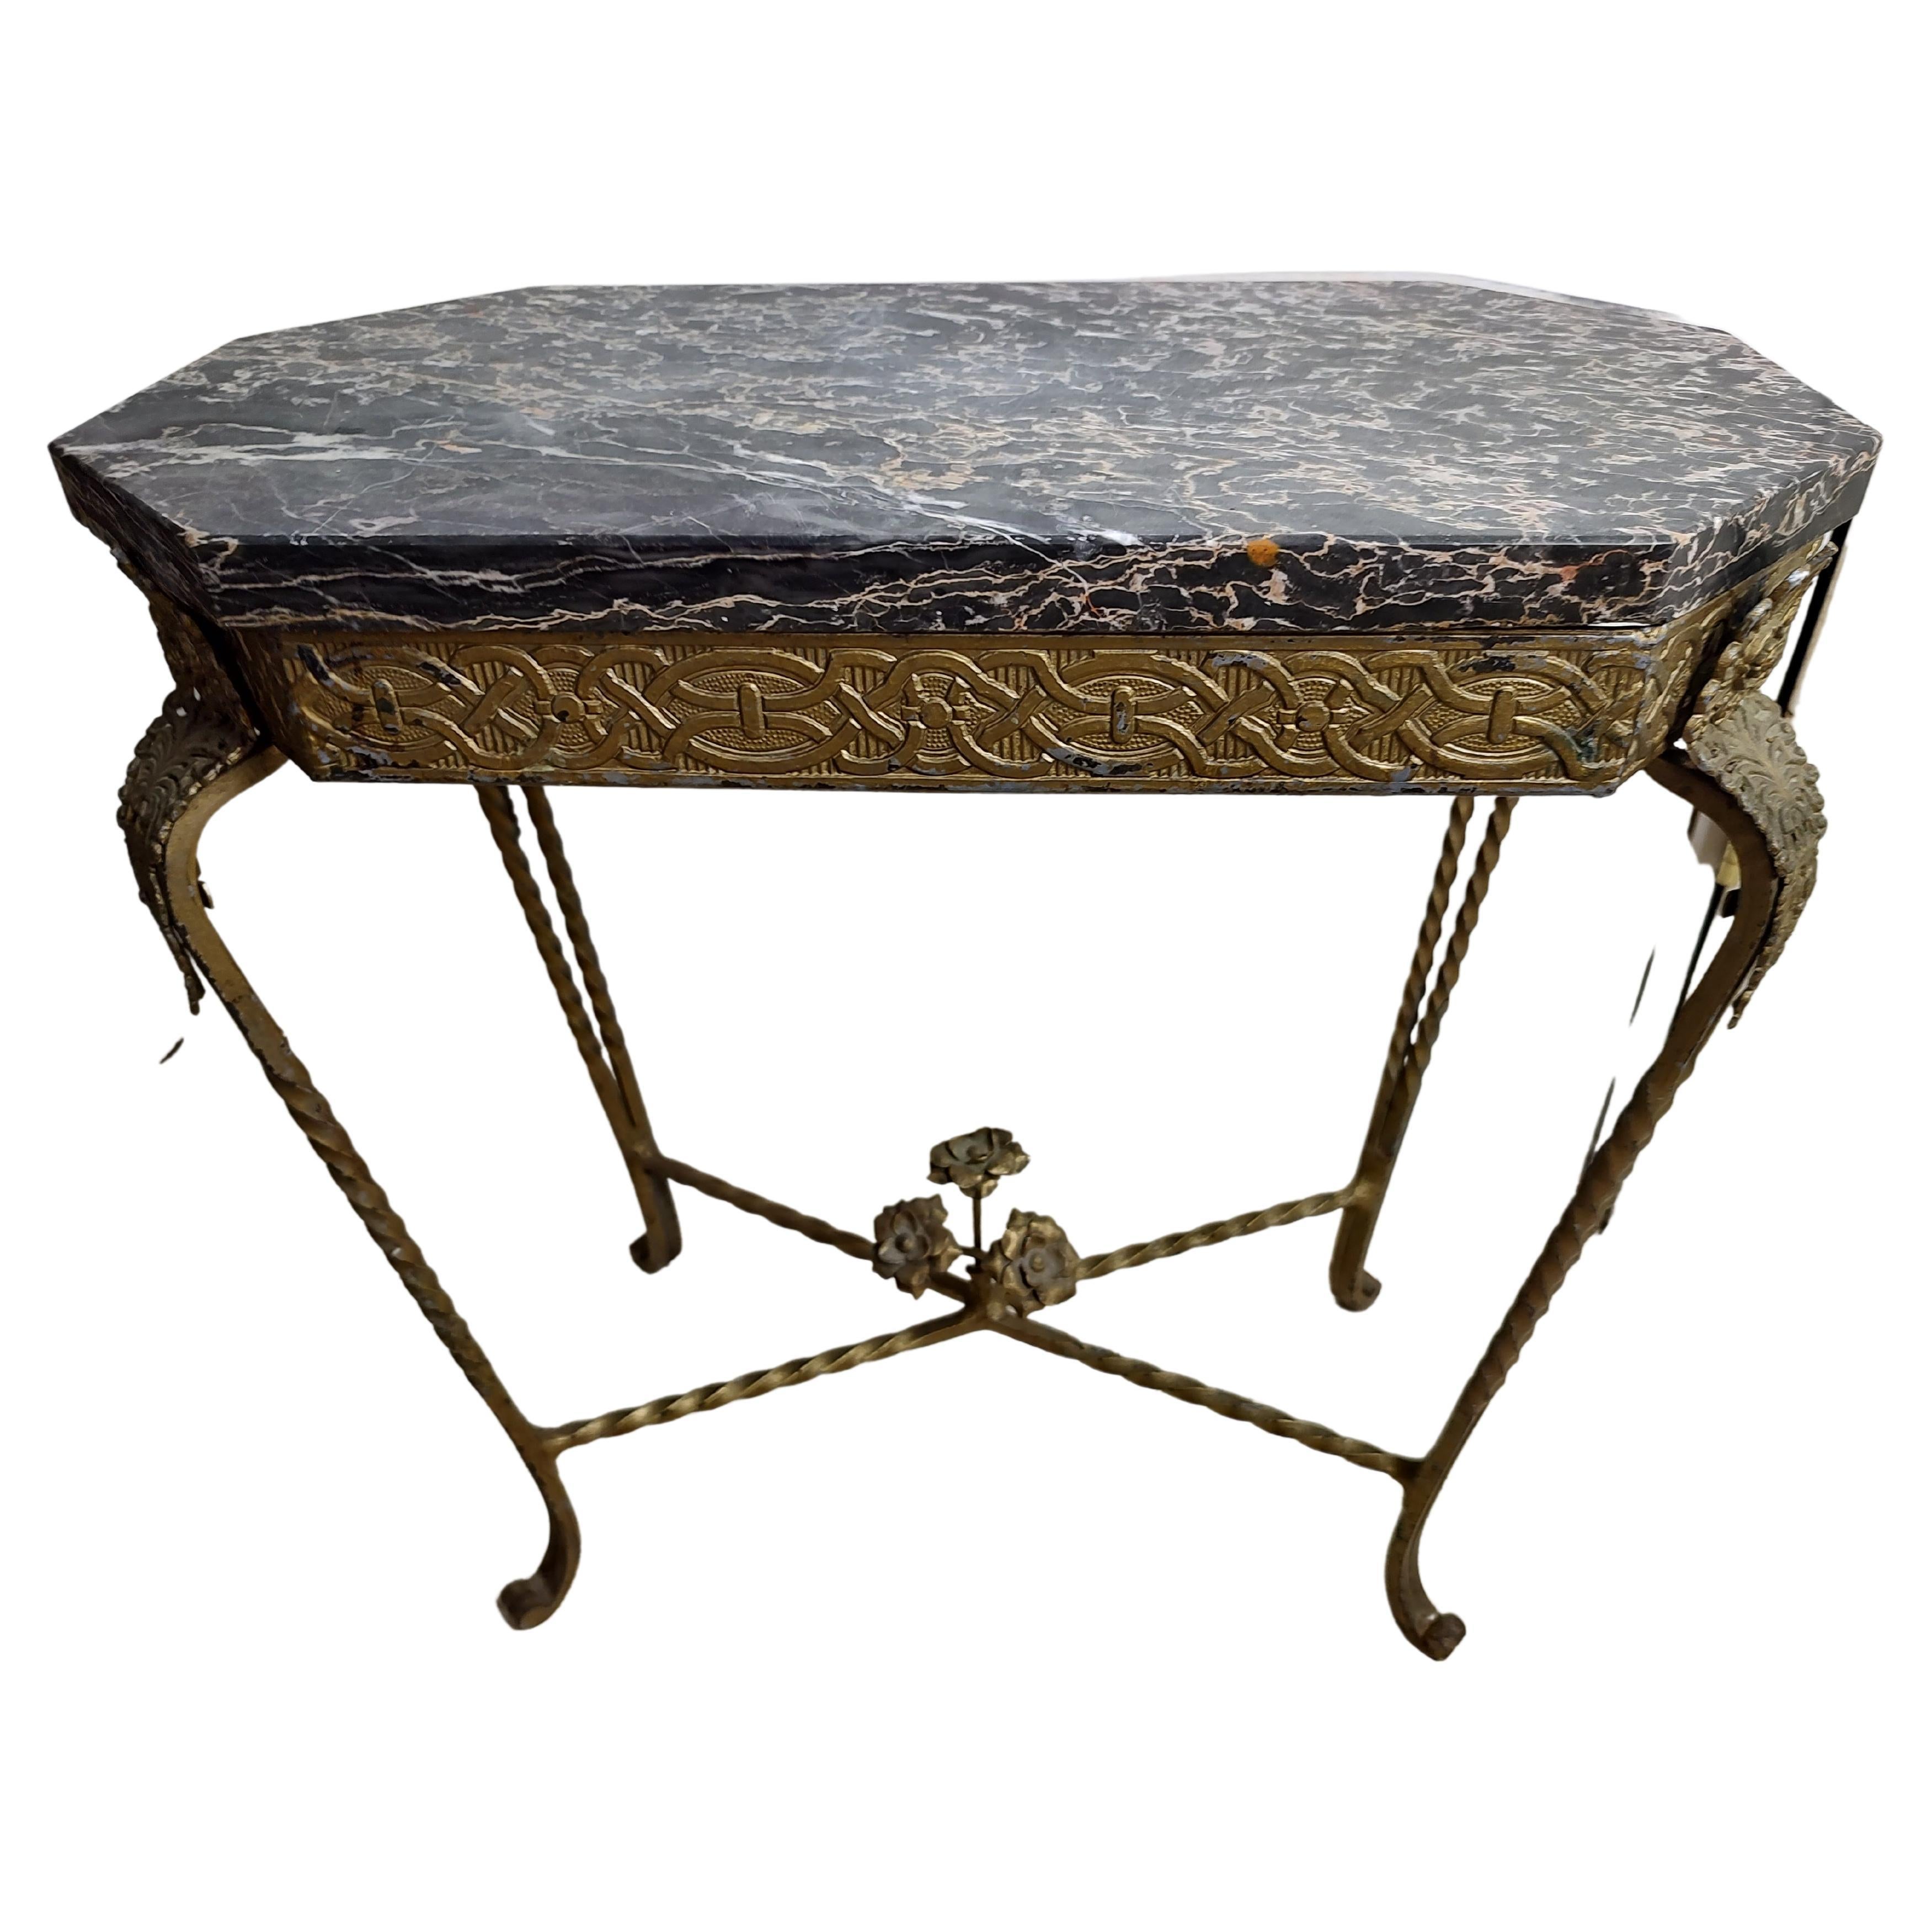 Mid-20th Century French Art Deco Gilt Iron with Marble Top Side Table For Sale